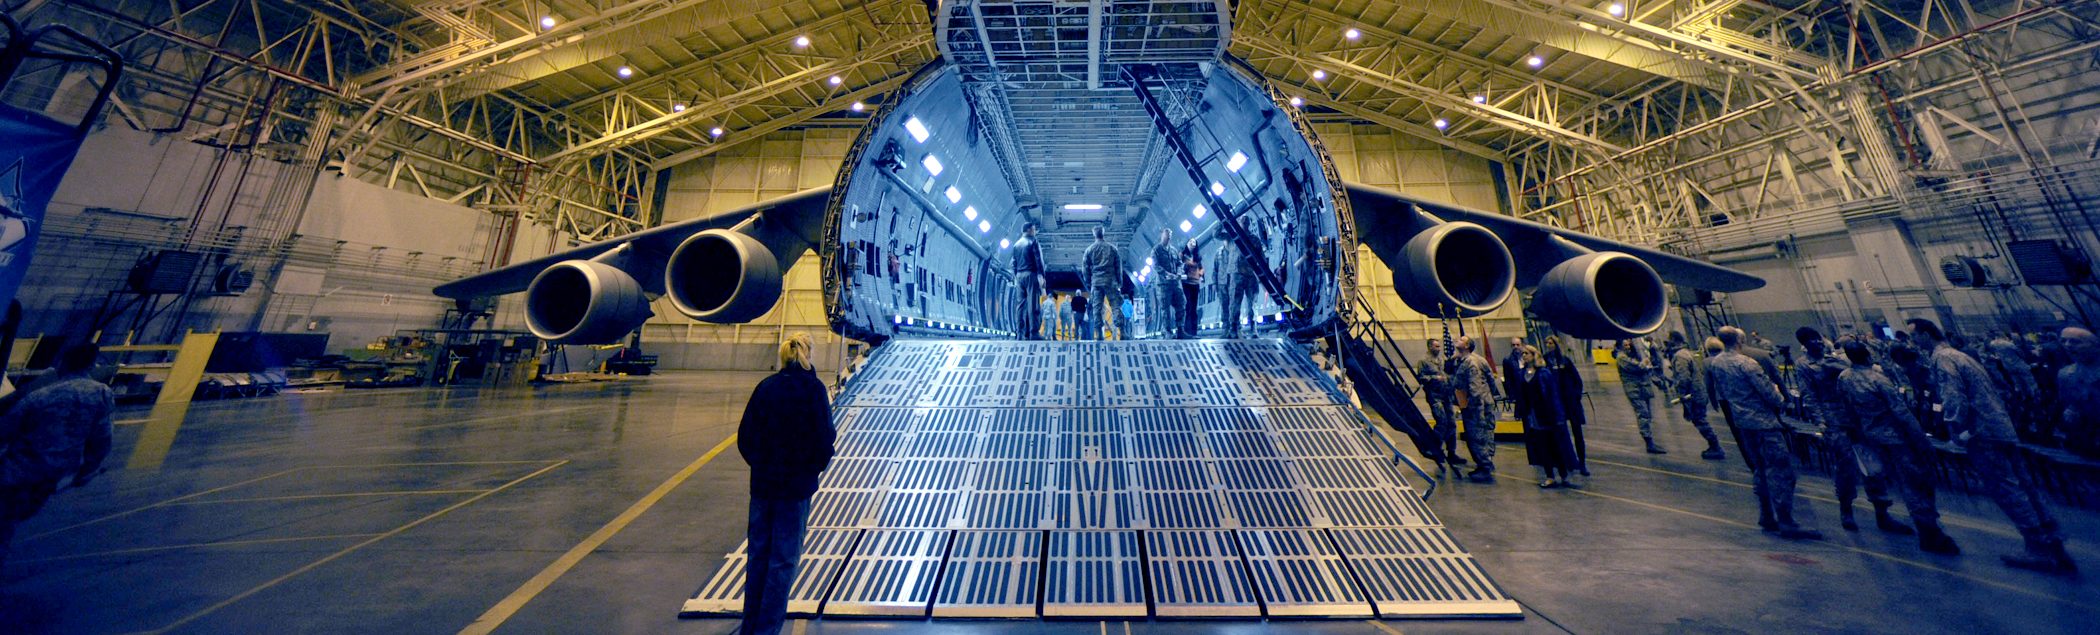 Members from the 105th Maintenance Squadron, Stewart Air National Guard Base, N.Y., tour and receive briefings on capabilities of the reconditioned C-5M Super Galaxy Nov. 5, 2010.  A ceremony was held at Stewart Air National Guard base to mark the completion of reconditioning on the C-5M Super Galaxy. (U.S. Air Force photo/Tech Sgt DeNoris A. Mickle)